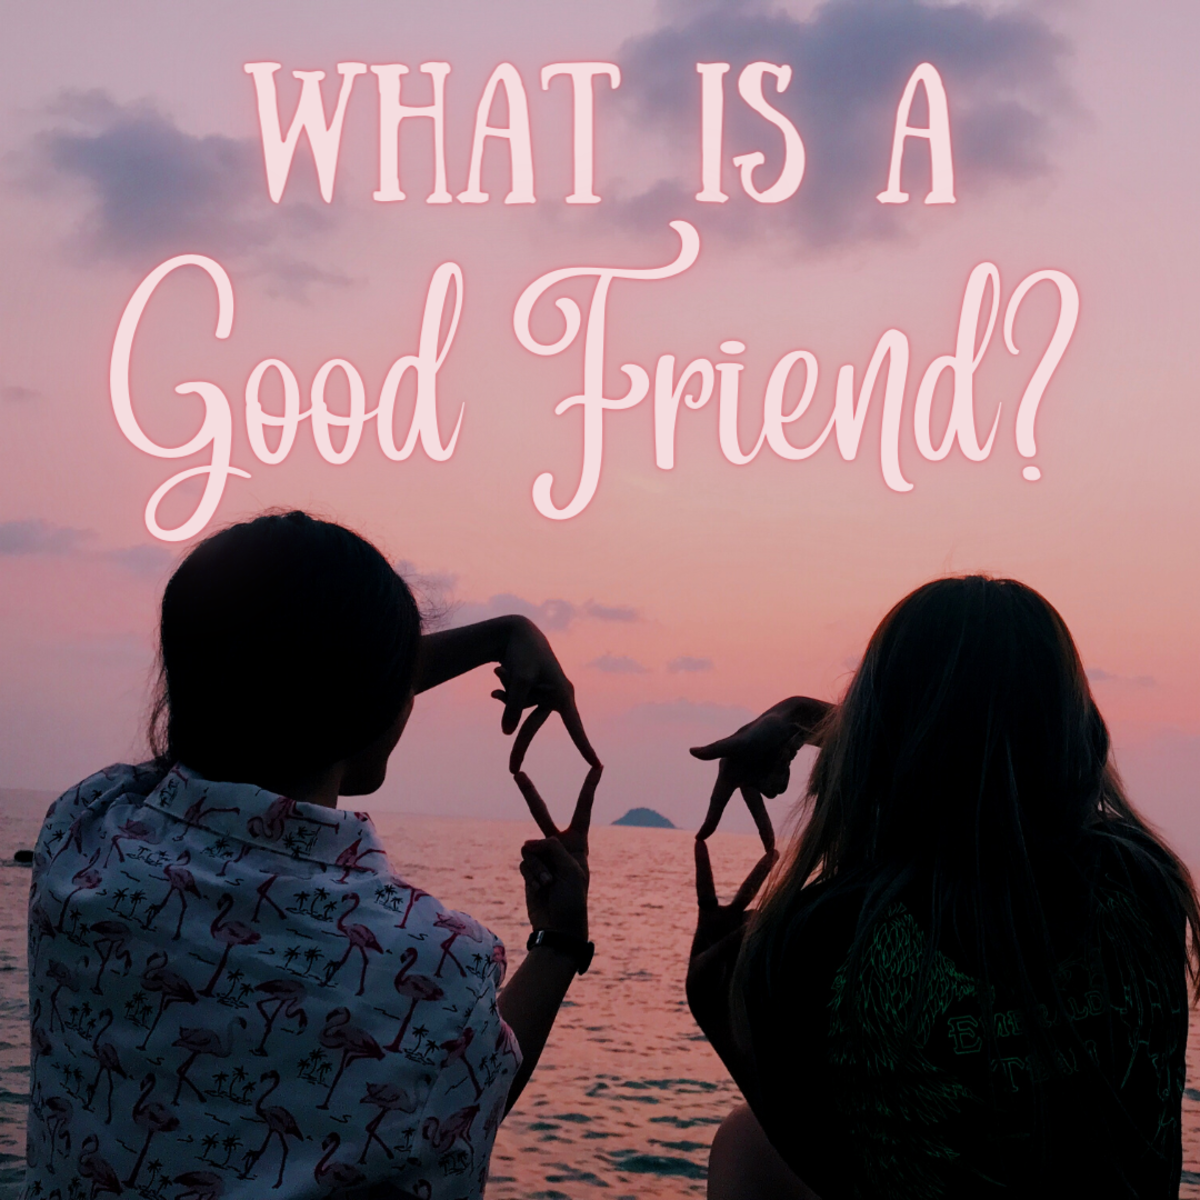 What are the ingredients that make a good friend?